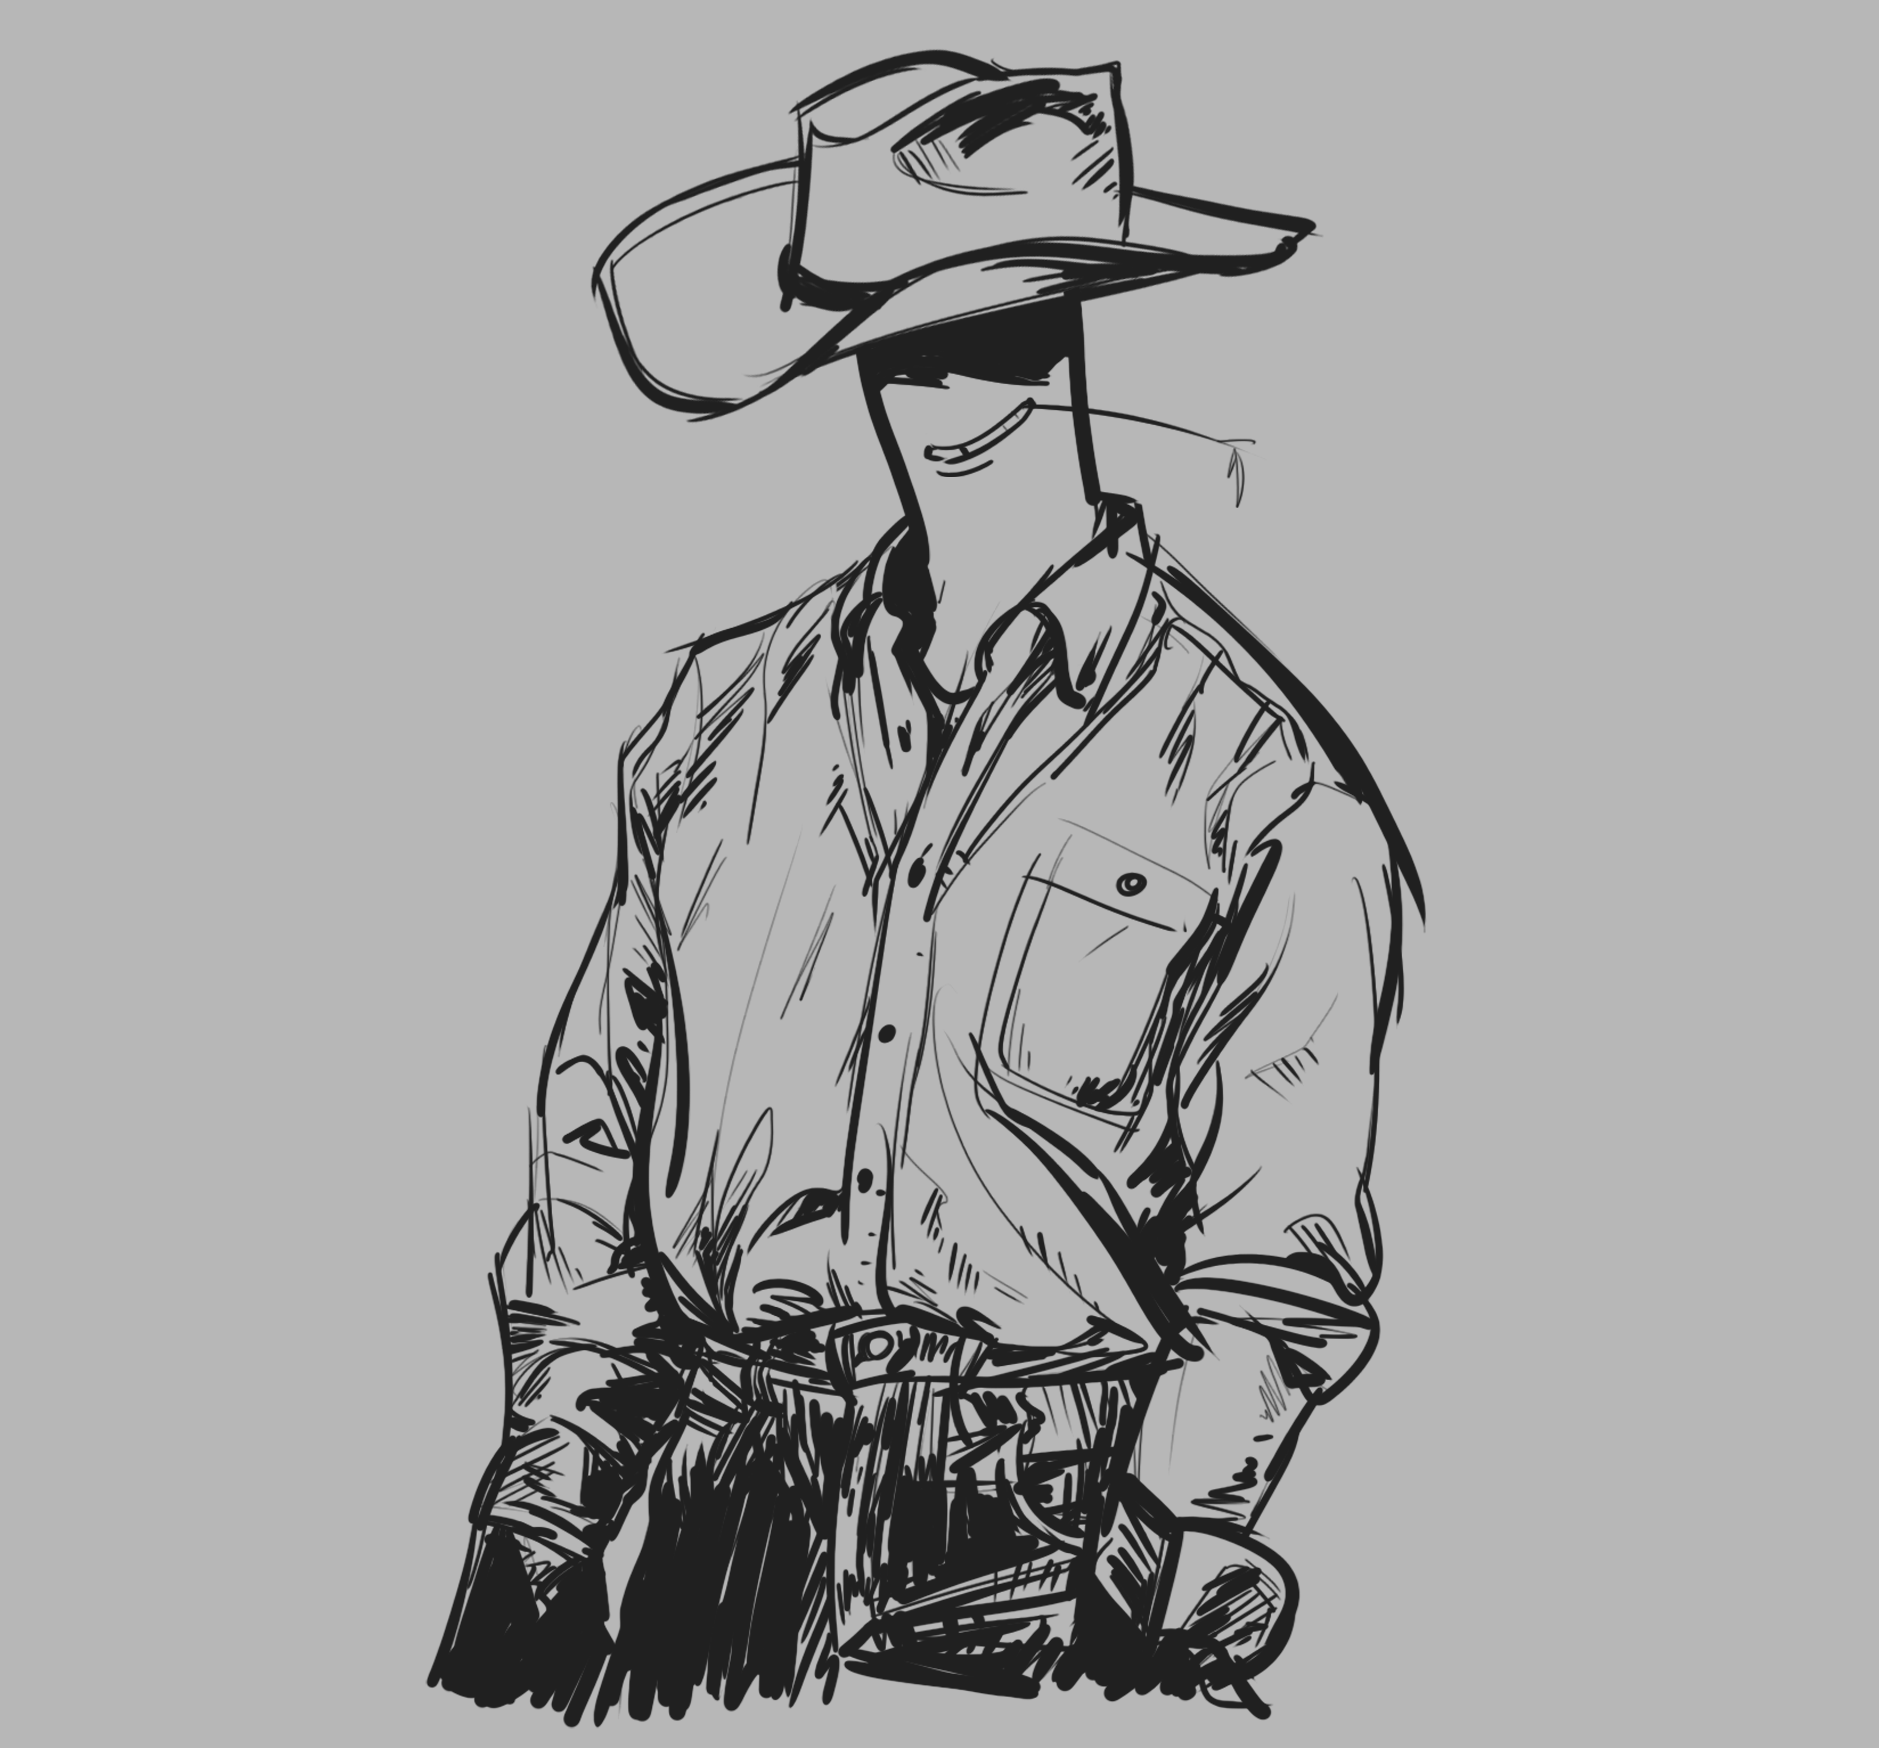 Greyscale digital drawing of a mostly featureless cartoon person in a button up, cowboy hat, and jeans. The hat casts a shadow over where the eyes should be. They're smiling with a piece of grass sticking out from their teeth.